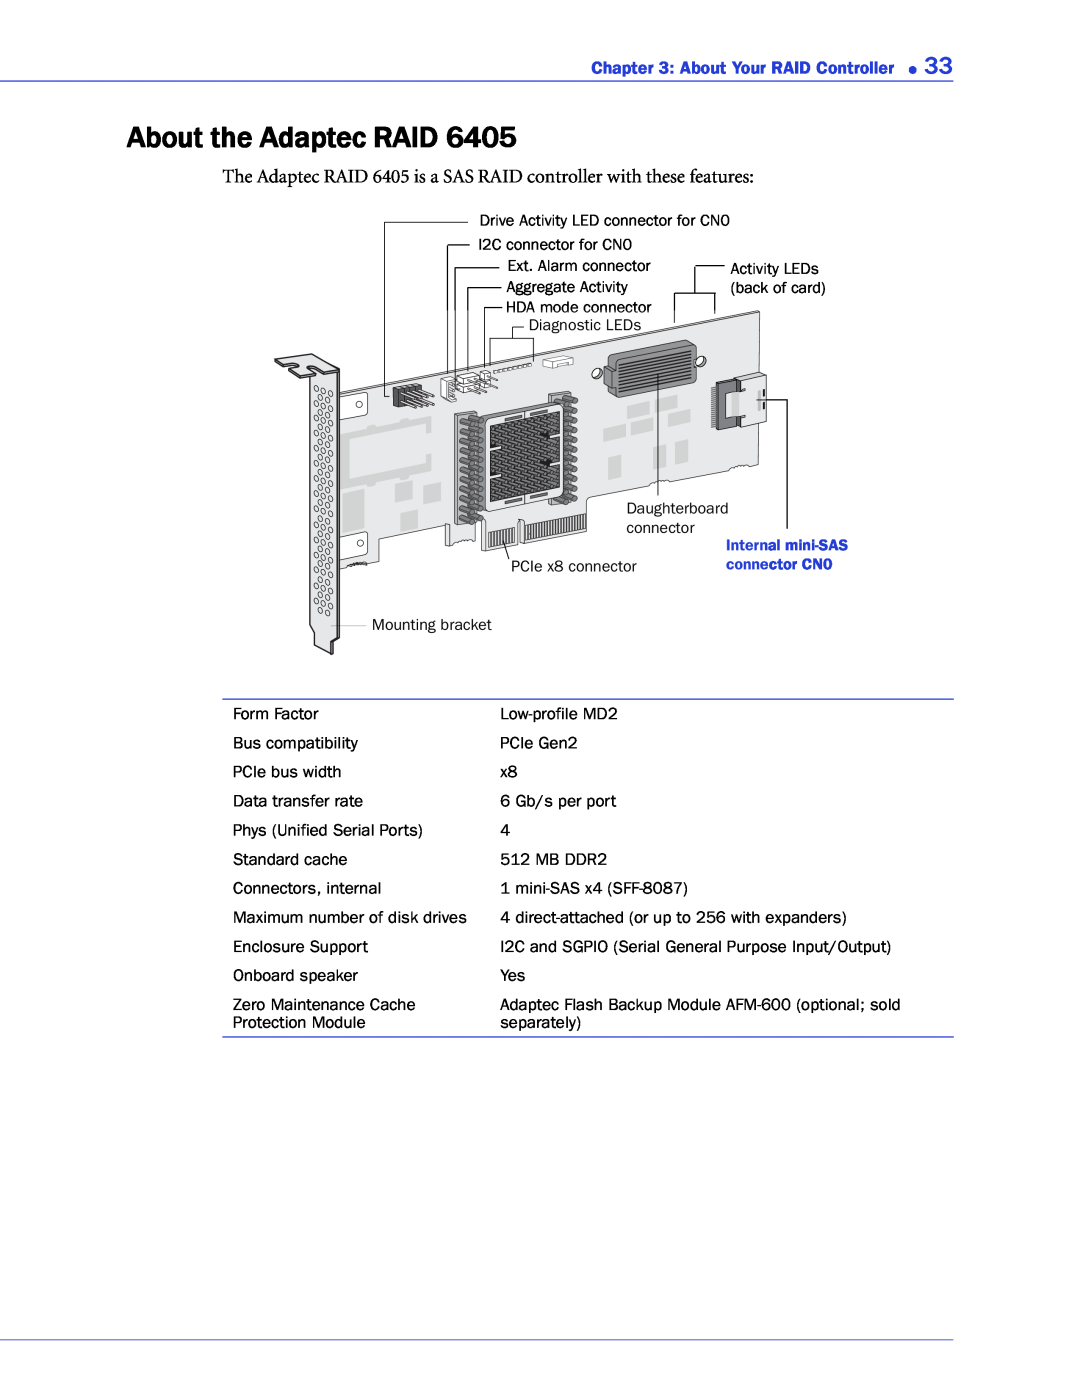 Adaptec 2268300R manual About the Adaptec RAID, The Adaptec RAID 6405 is a SAS RAID controller with these features 